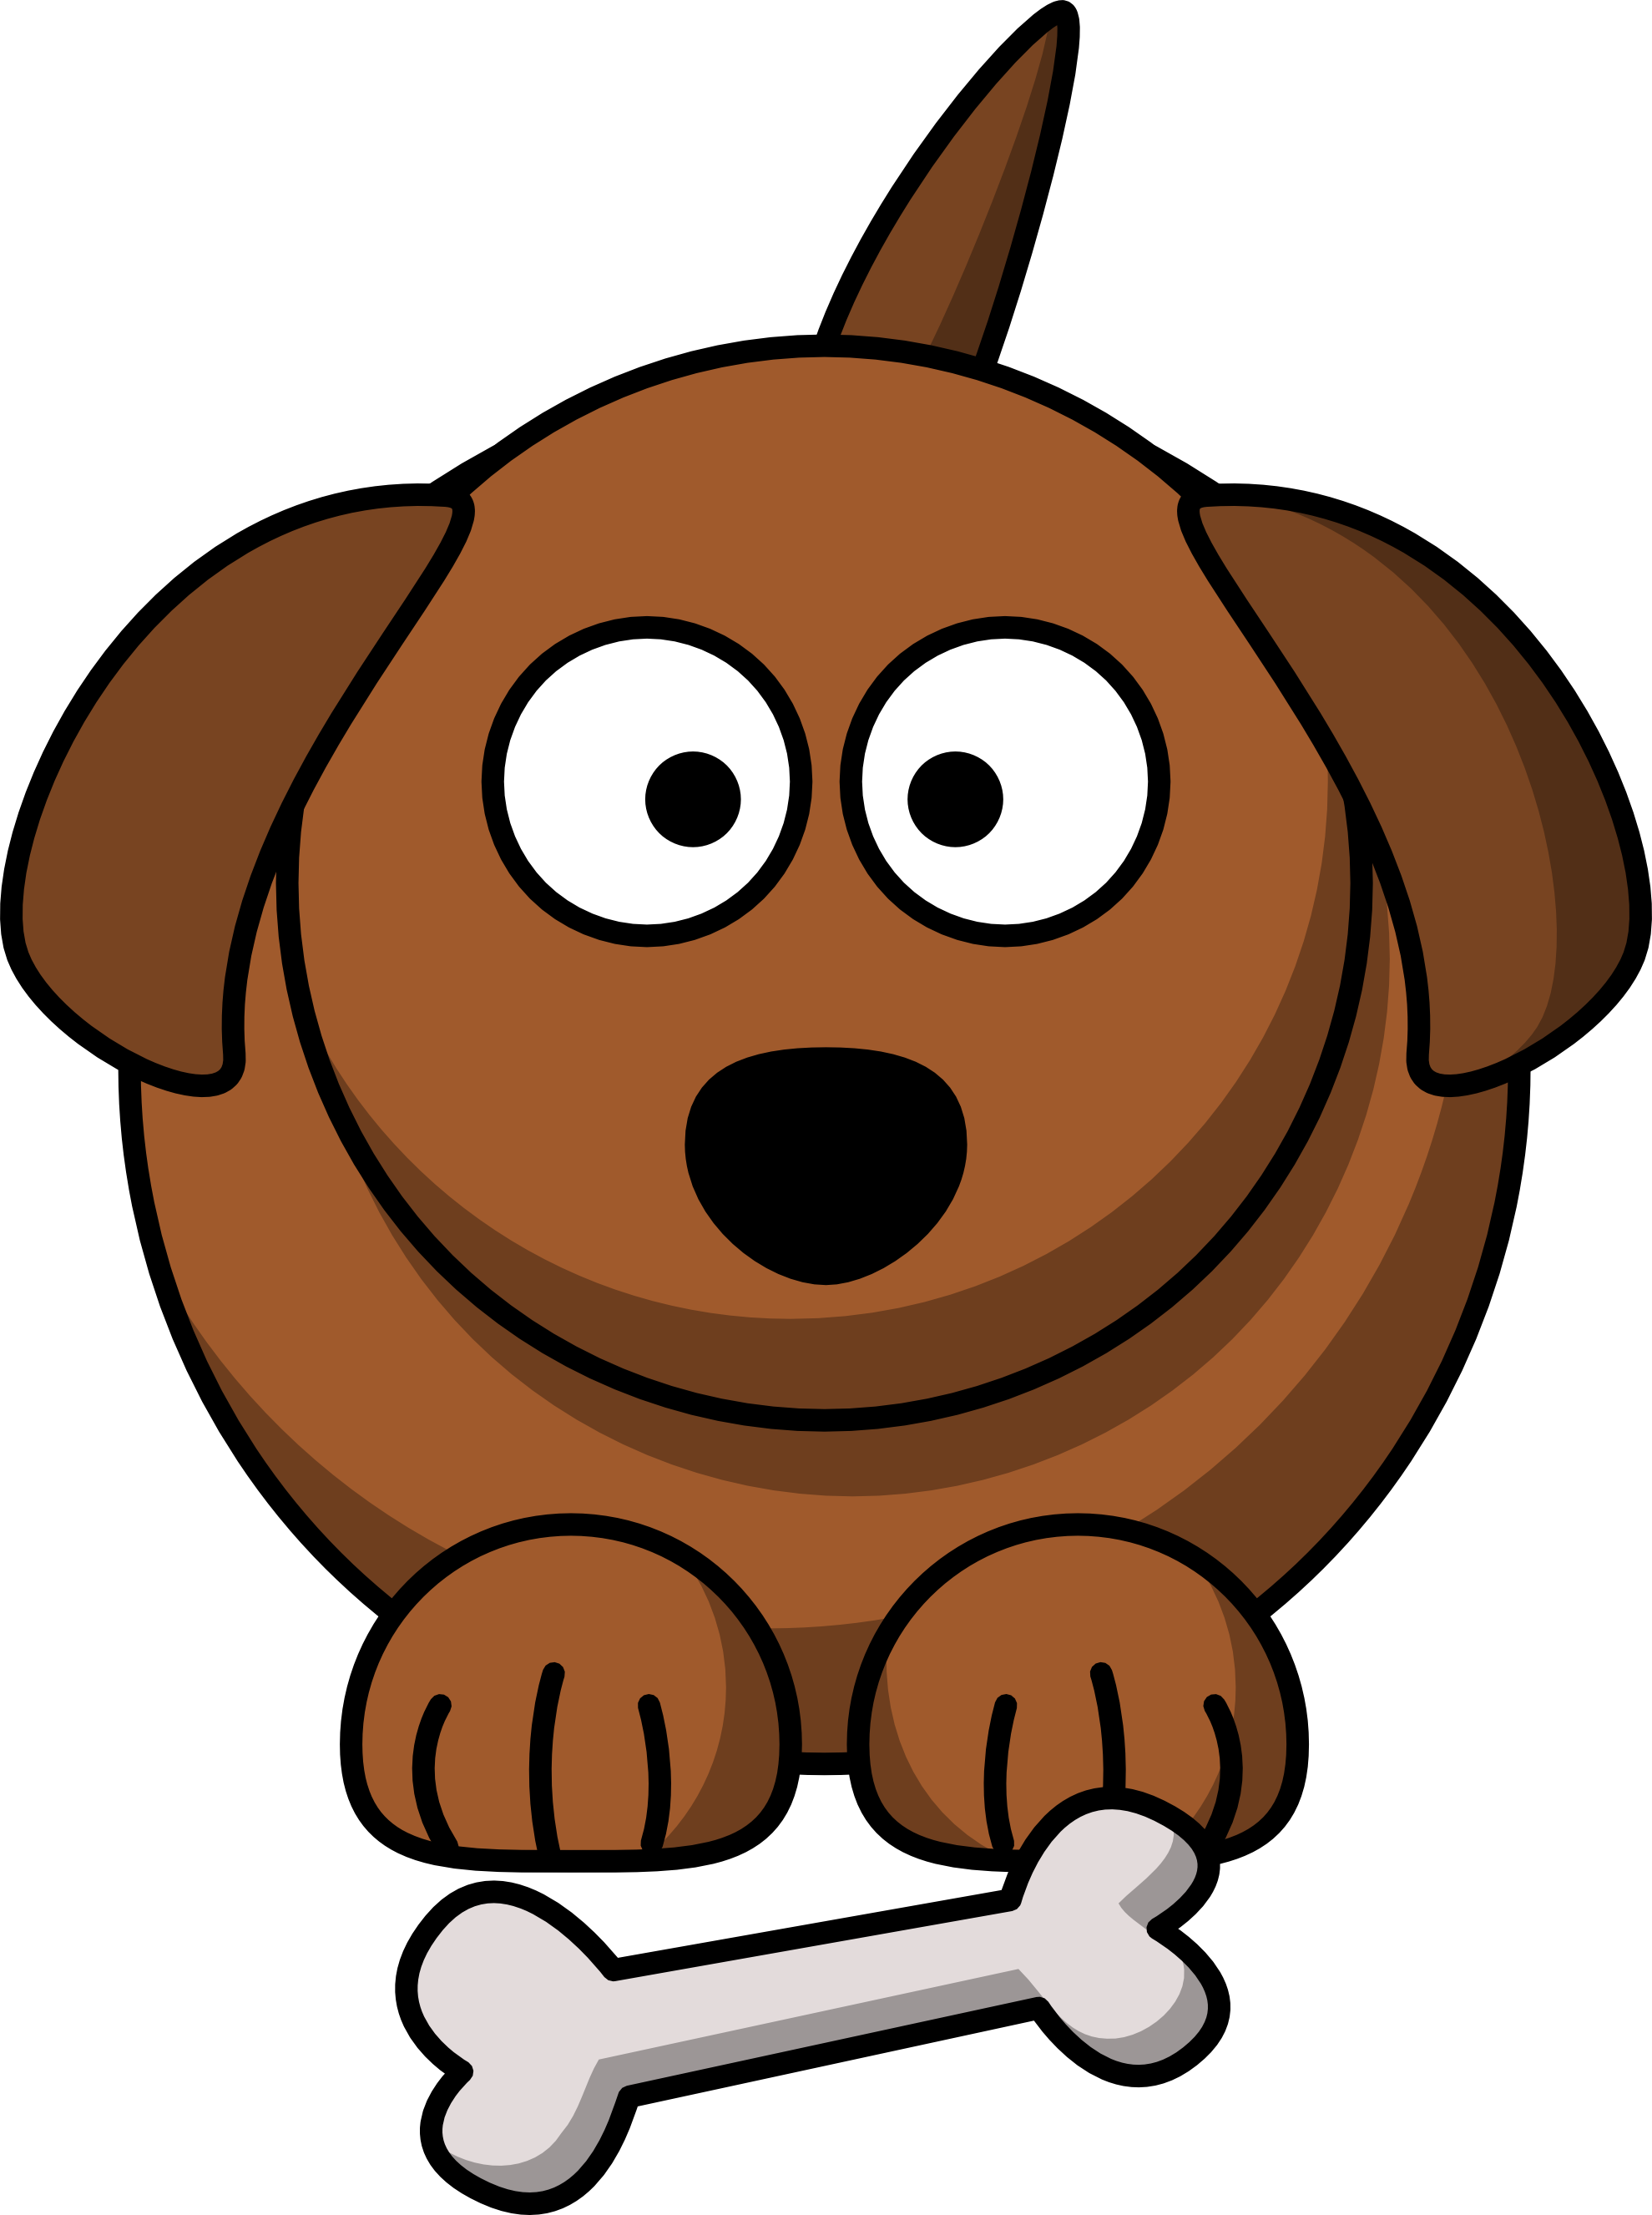 Dog toy clip art free clipart images - Cliparting.com